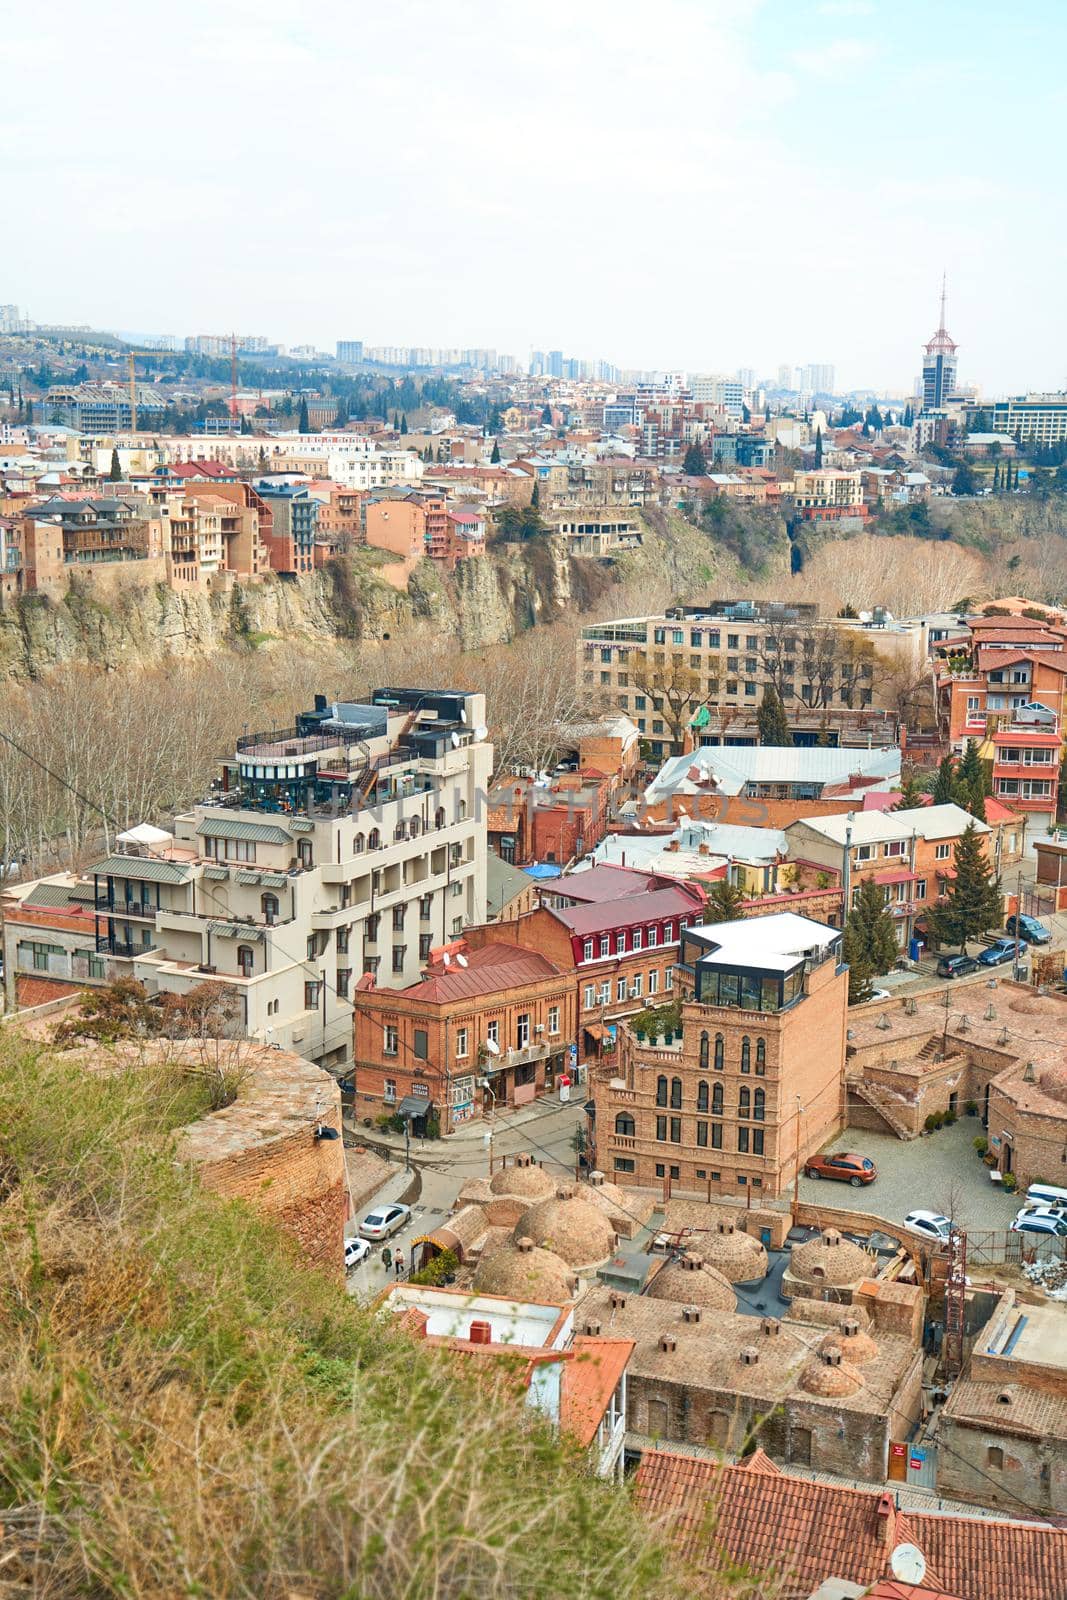 Panoramic view of Tbilisi, the capital of Georgia with old town and modern architecture.